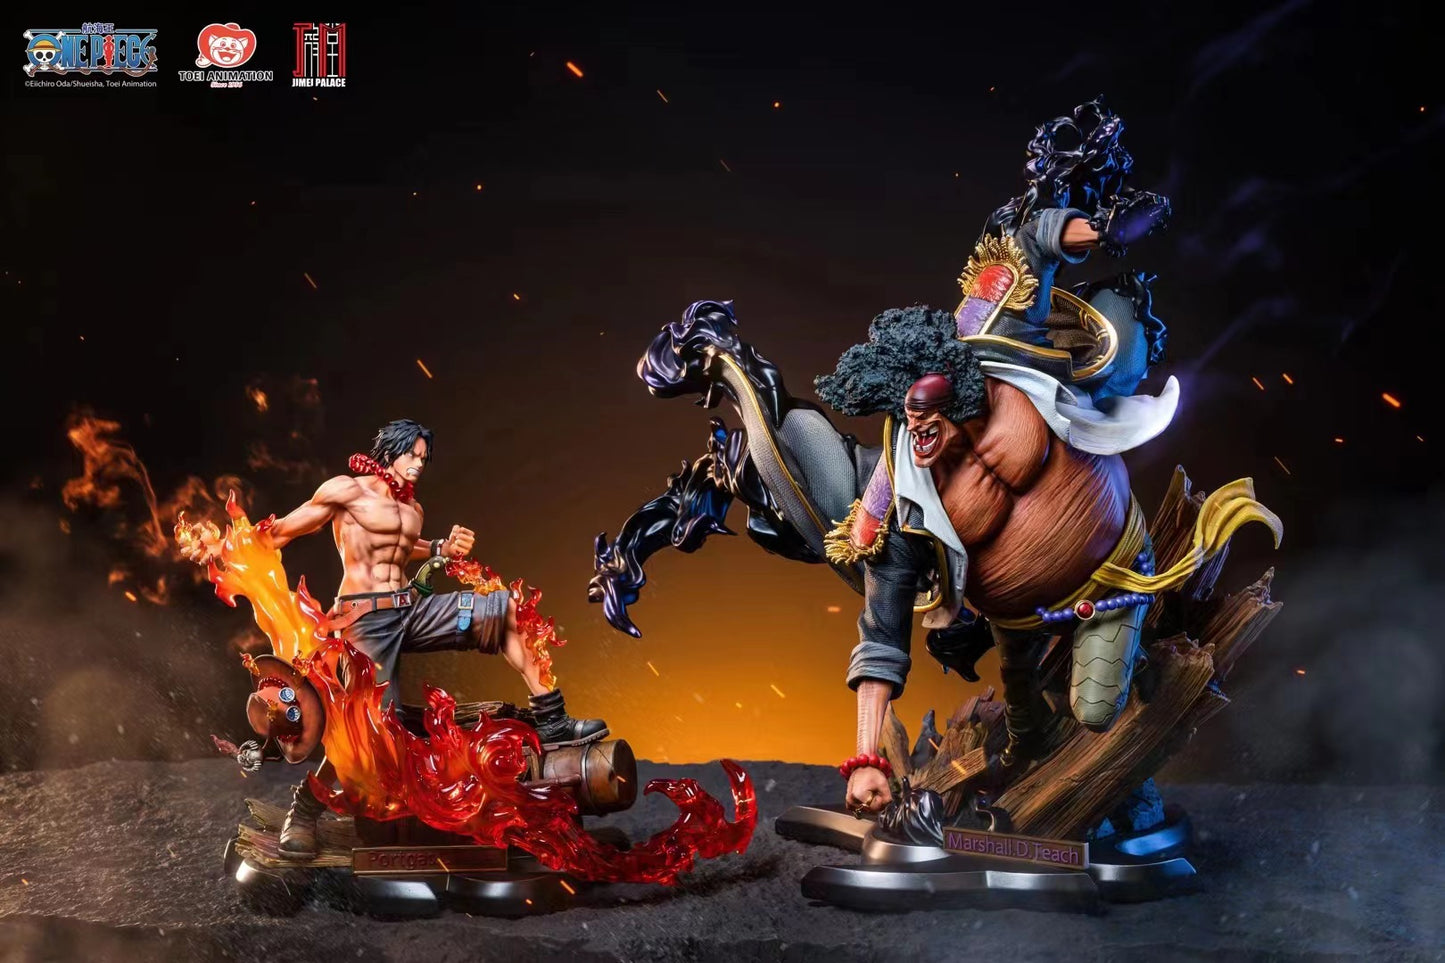 * In Stock * JiMei Studio One Piece Genuine authorization Portgas D. Ace VS Marshall D. Teach Resin Statue